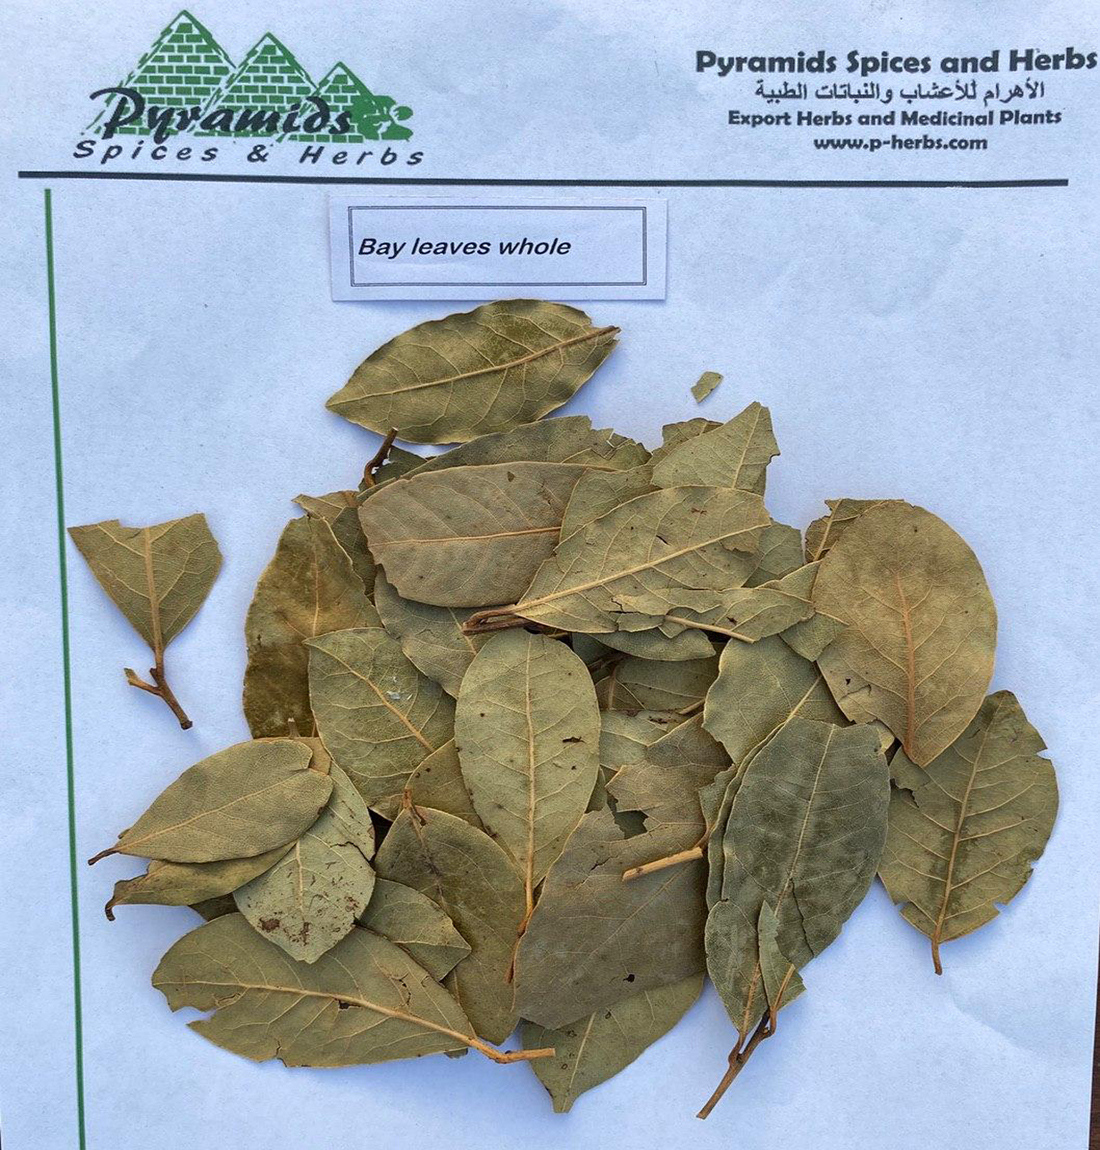 Bay leaves whole